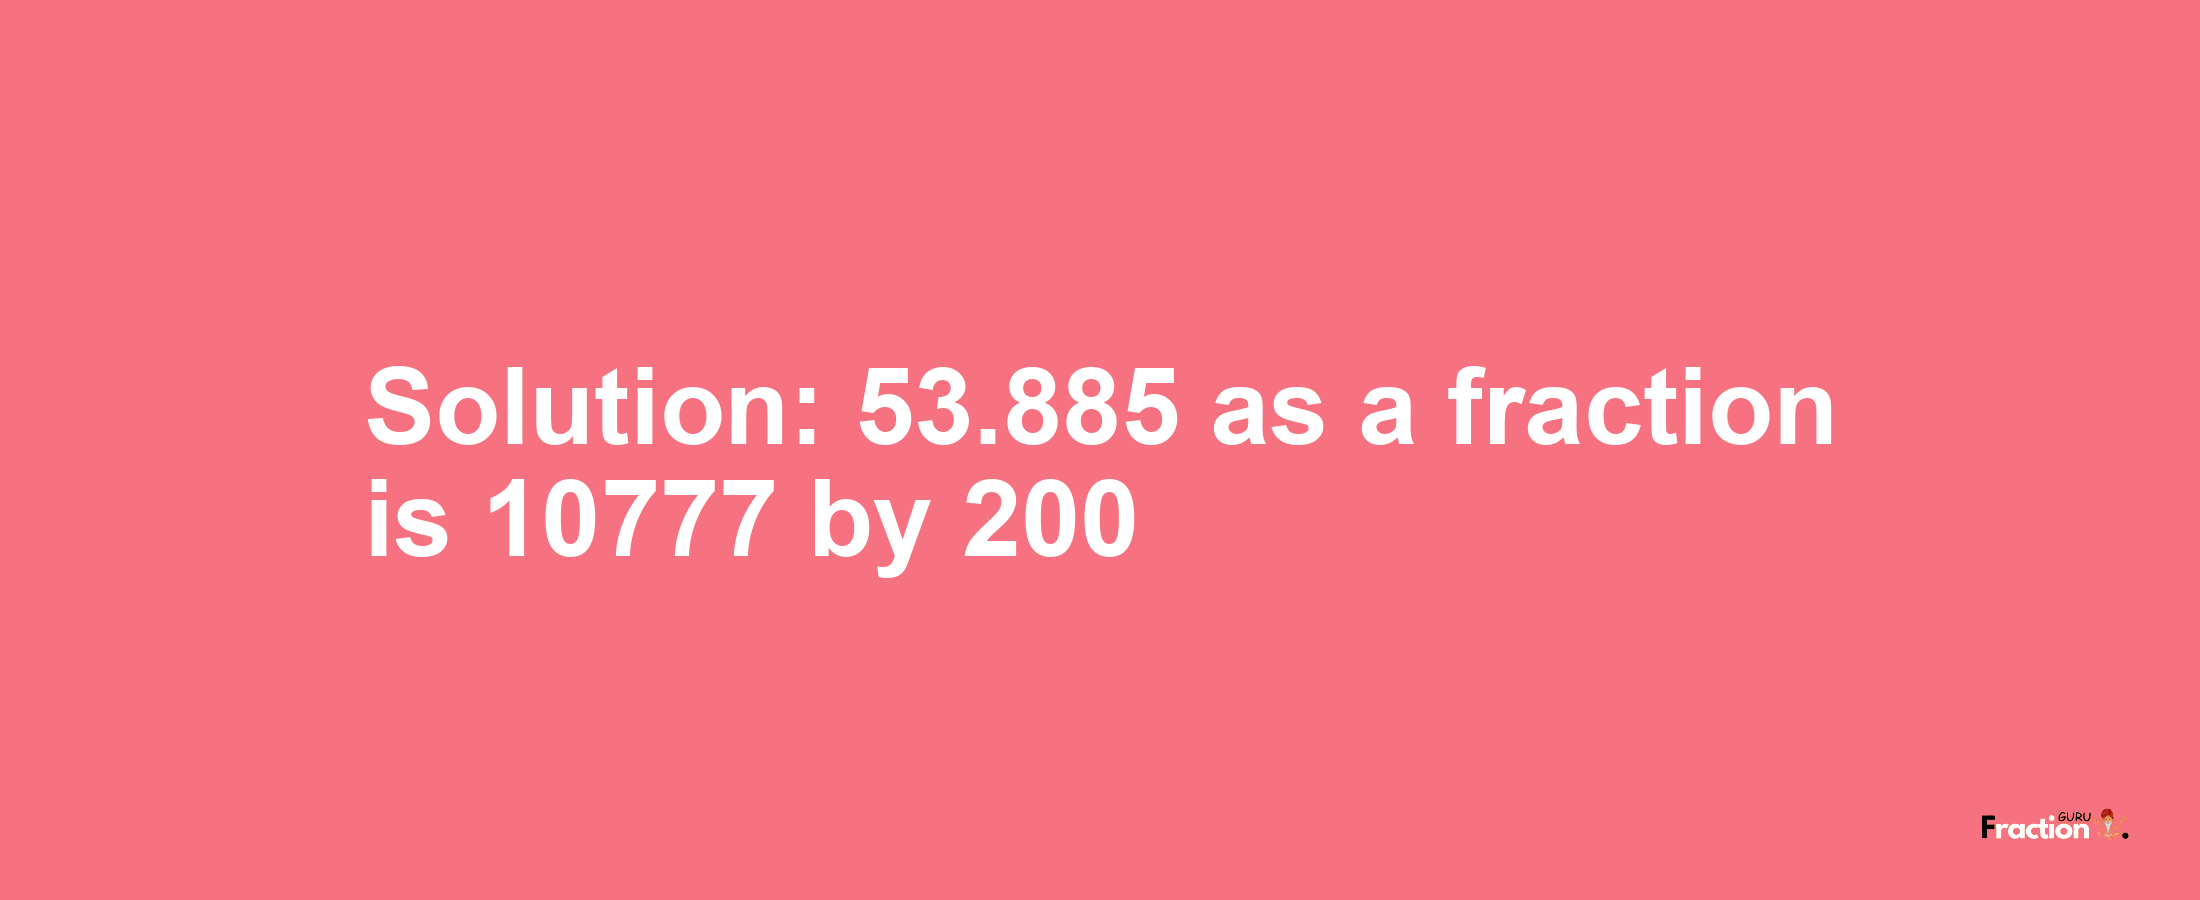 Solution:53.885 as a fraction is 10777/200